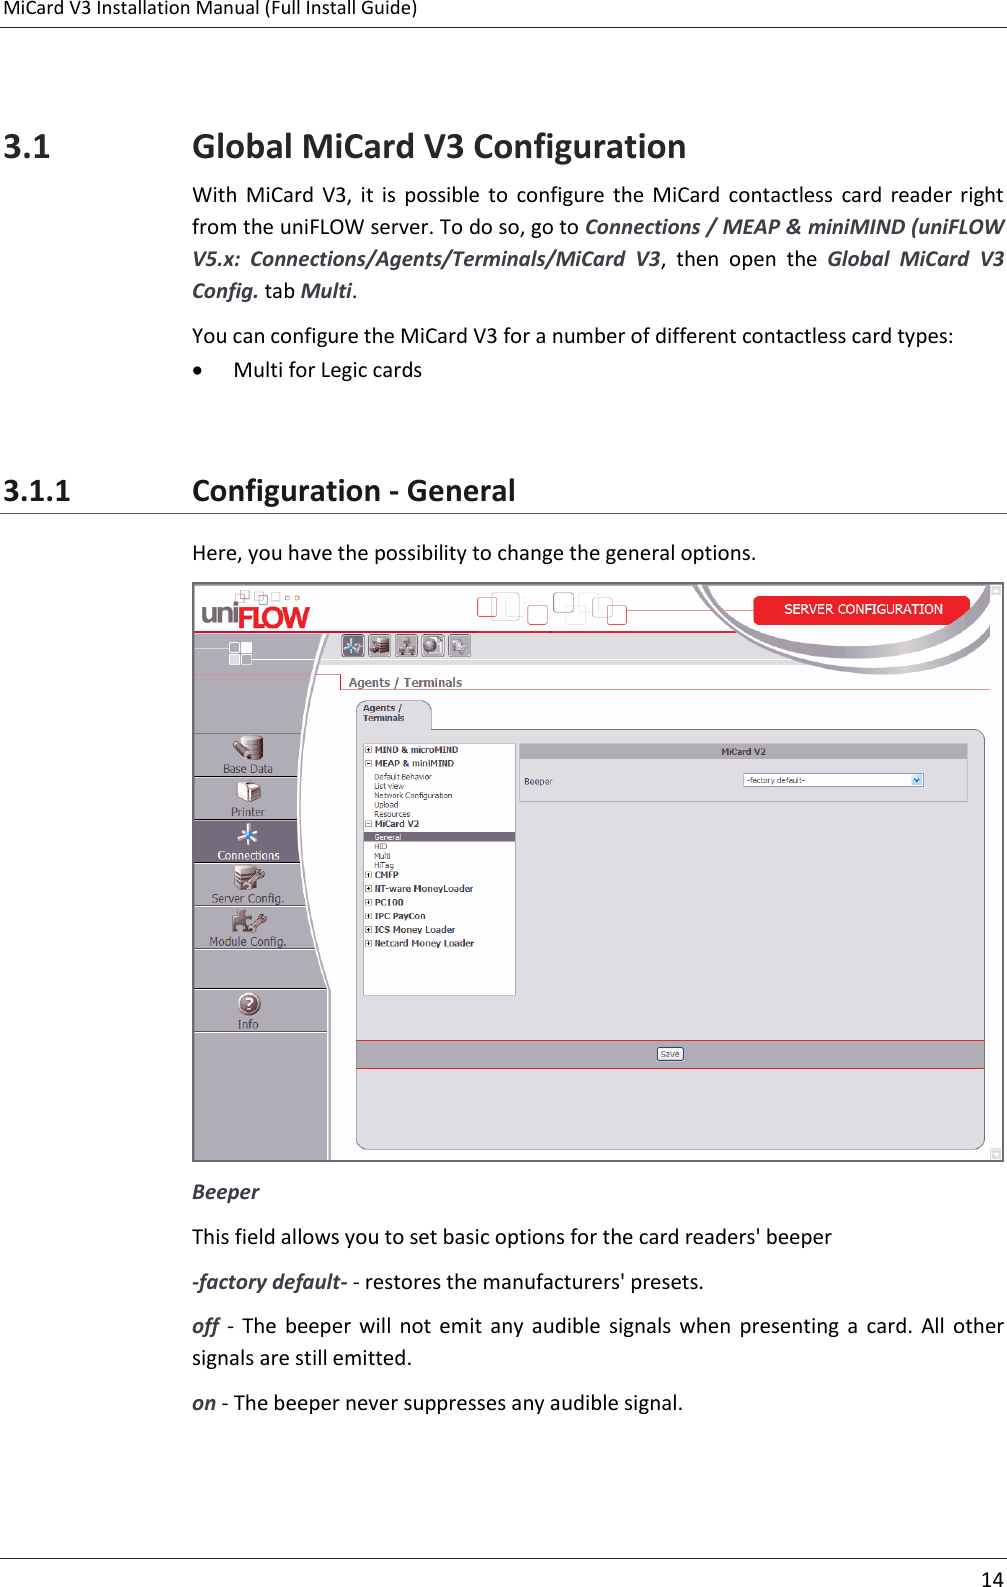 MiCard V3 Installation Manual (Full Install Guide)     14   3.1 Global MiCard V3 Configuration With  MiCard  V3,  it  is  possible  to  configure  the  MiCard  contactless  card  reader  right from the uniFLOW server. To do so, go to Connections / MEAP &amp; miniMIND (uniFLOW V5.x:  Connections/Agents/Terminals/MiCard  V3,  then  open  the  Global  MiCard  V3 Config. tab Multi. You can configure the MiCard V3 for a number of different contactless card types:  Multi for Legic cards  3.1.1 Configuration - General Here, you have the possibility to change the general options.  Beeper This field allows you to set basic options for the card readers&apos; beeper -factory default- - restores the manufacturers&apos; presets. off  -  The  beeper  will  not  emit  any  audible  signals  when  presenting  a  card.  All  other signals are still emitted. on - The beeper never suppresses any audible signal.  